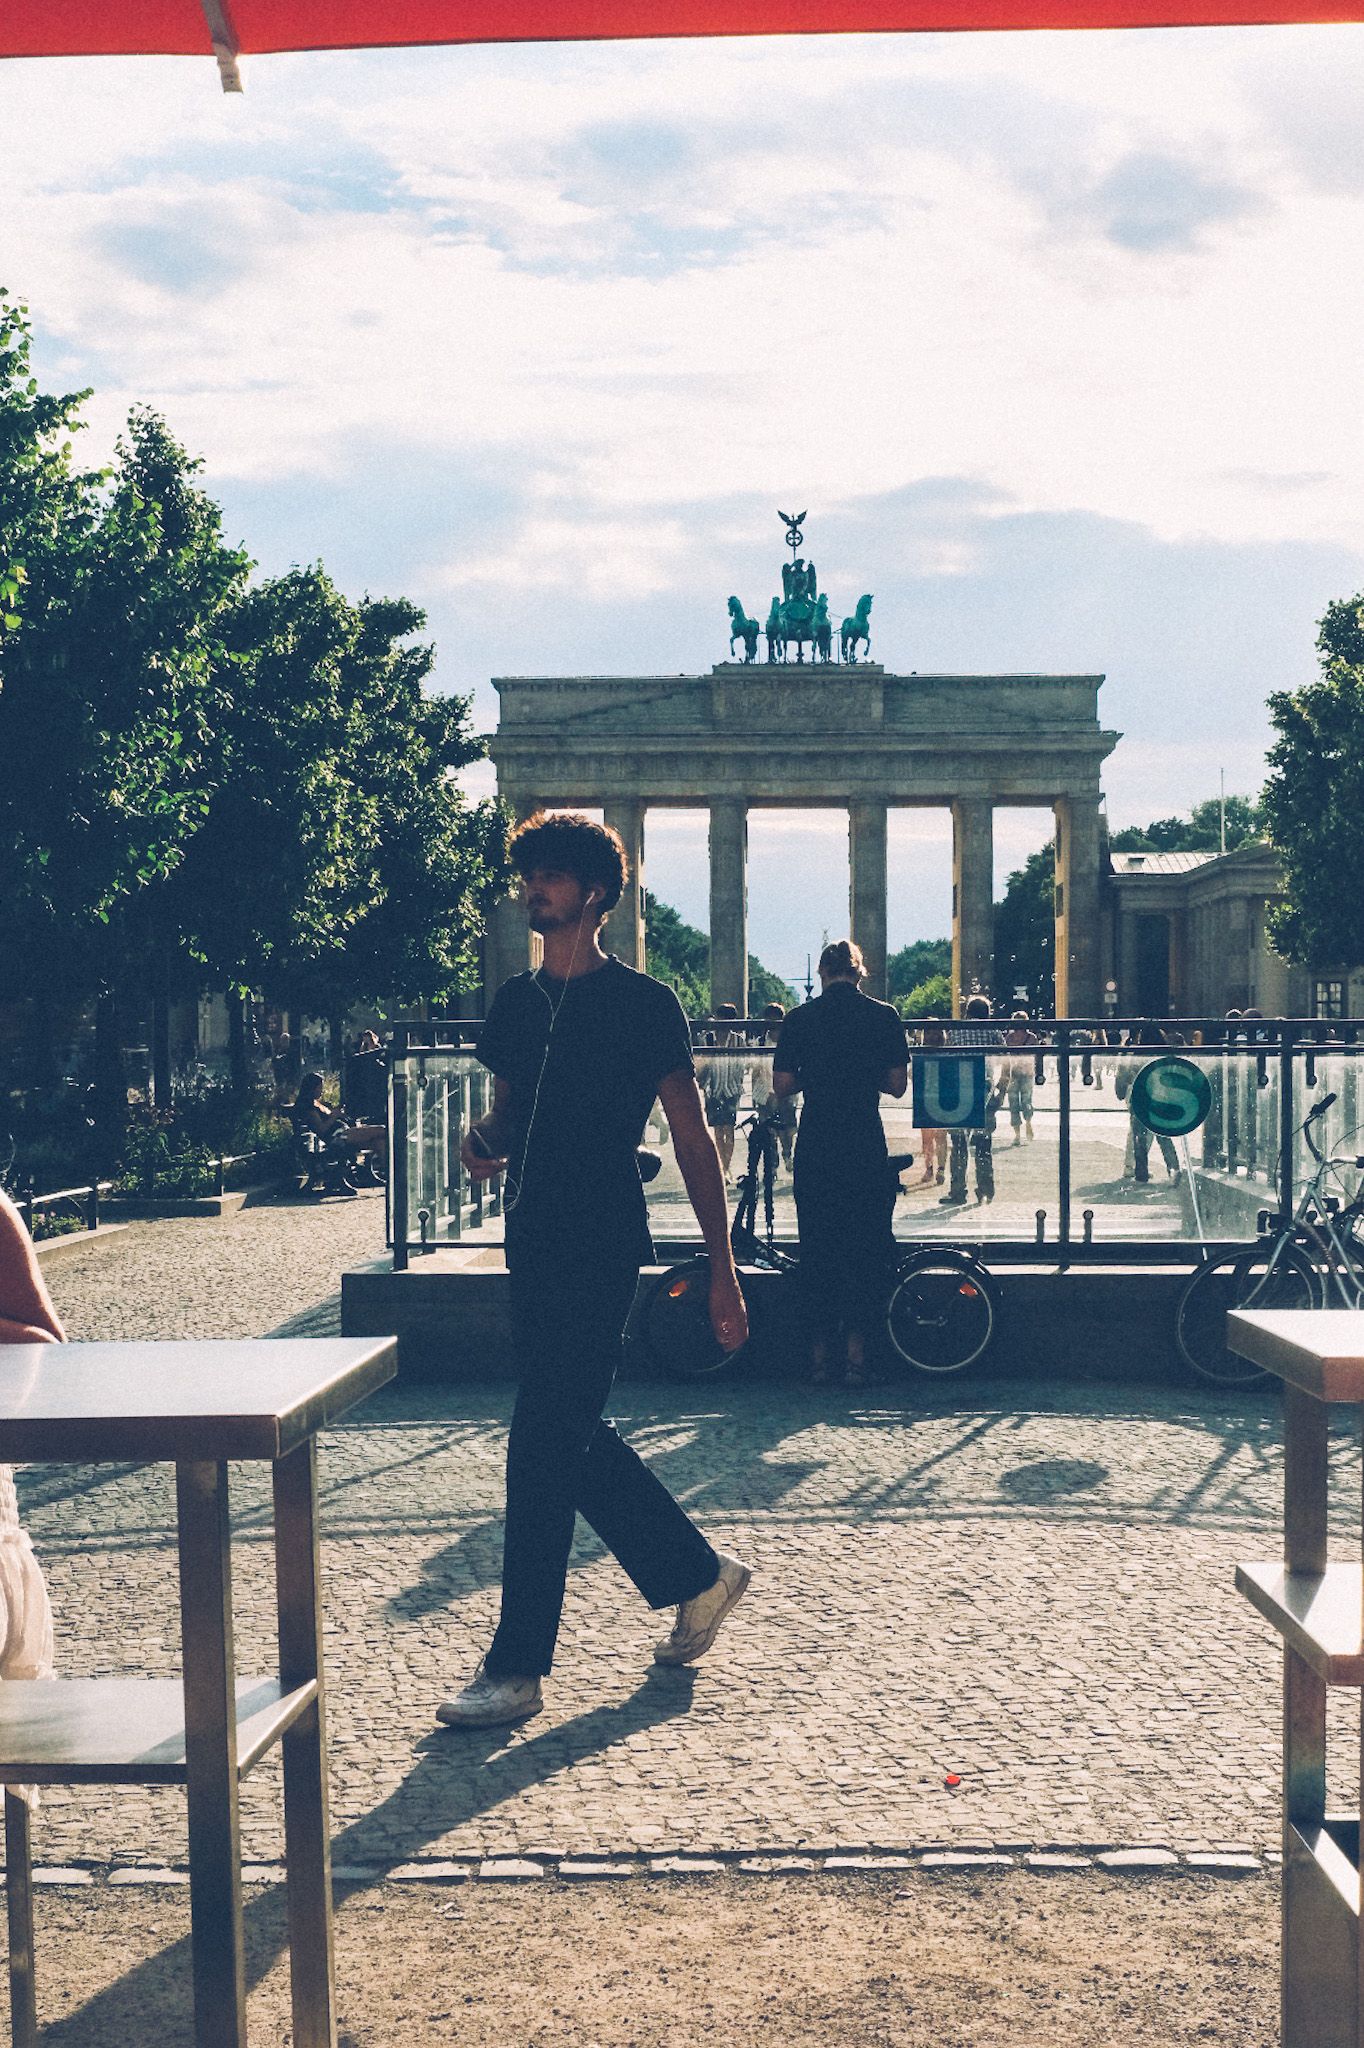 On a sunny afternoon, a man passes in front of Berlin’s Brandenberg Gate.